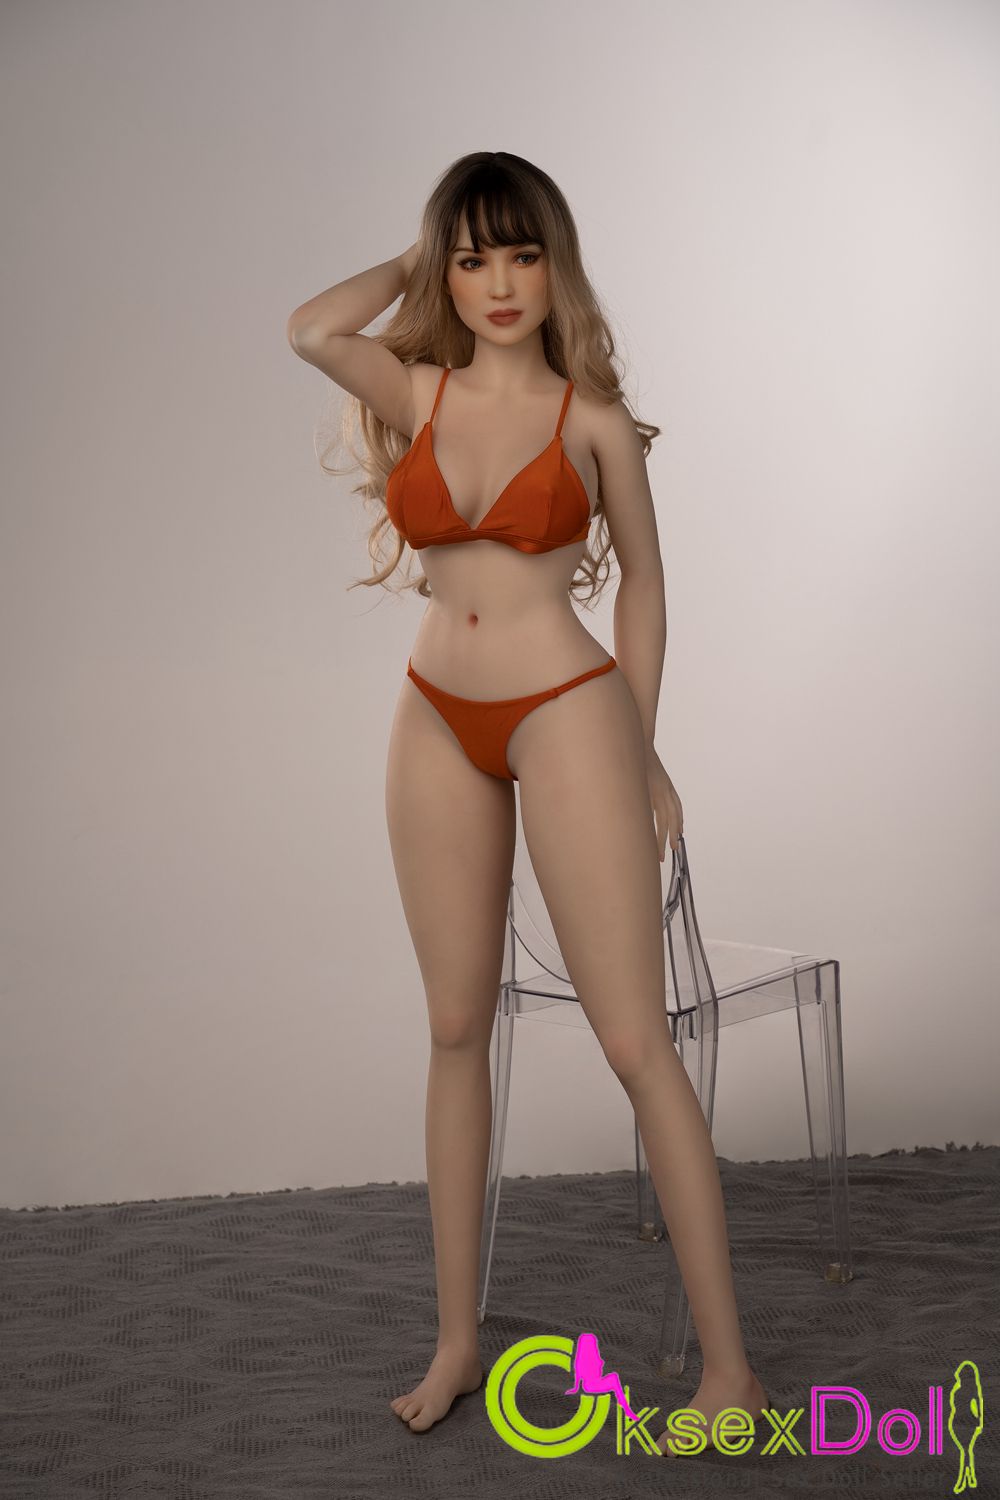 USA Busty sex dolls images